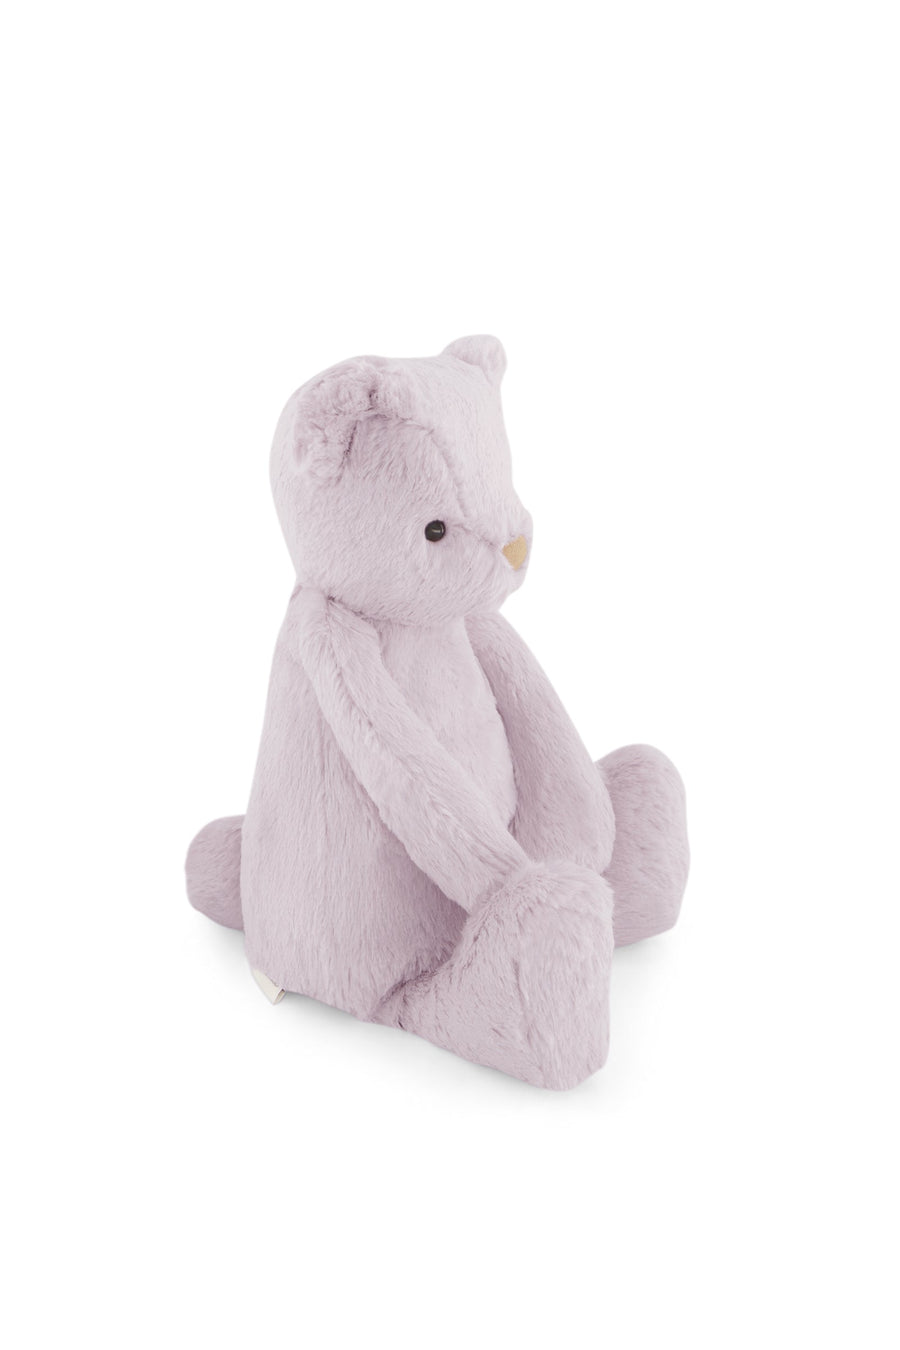 Snuggle Bunnies - George the Bear - Violet Childrens Toy from Jamie Kay NZ